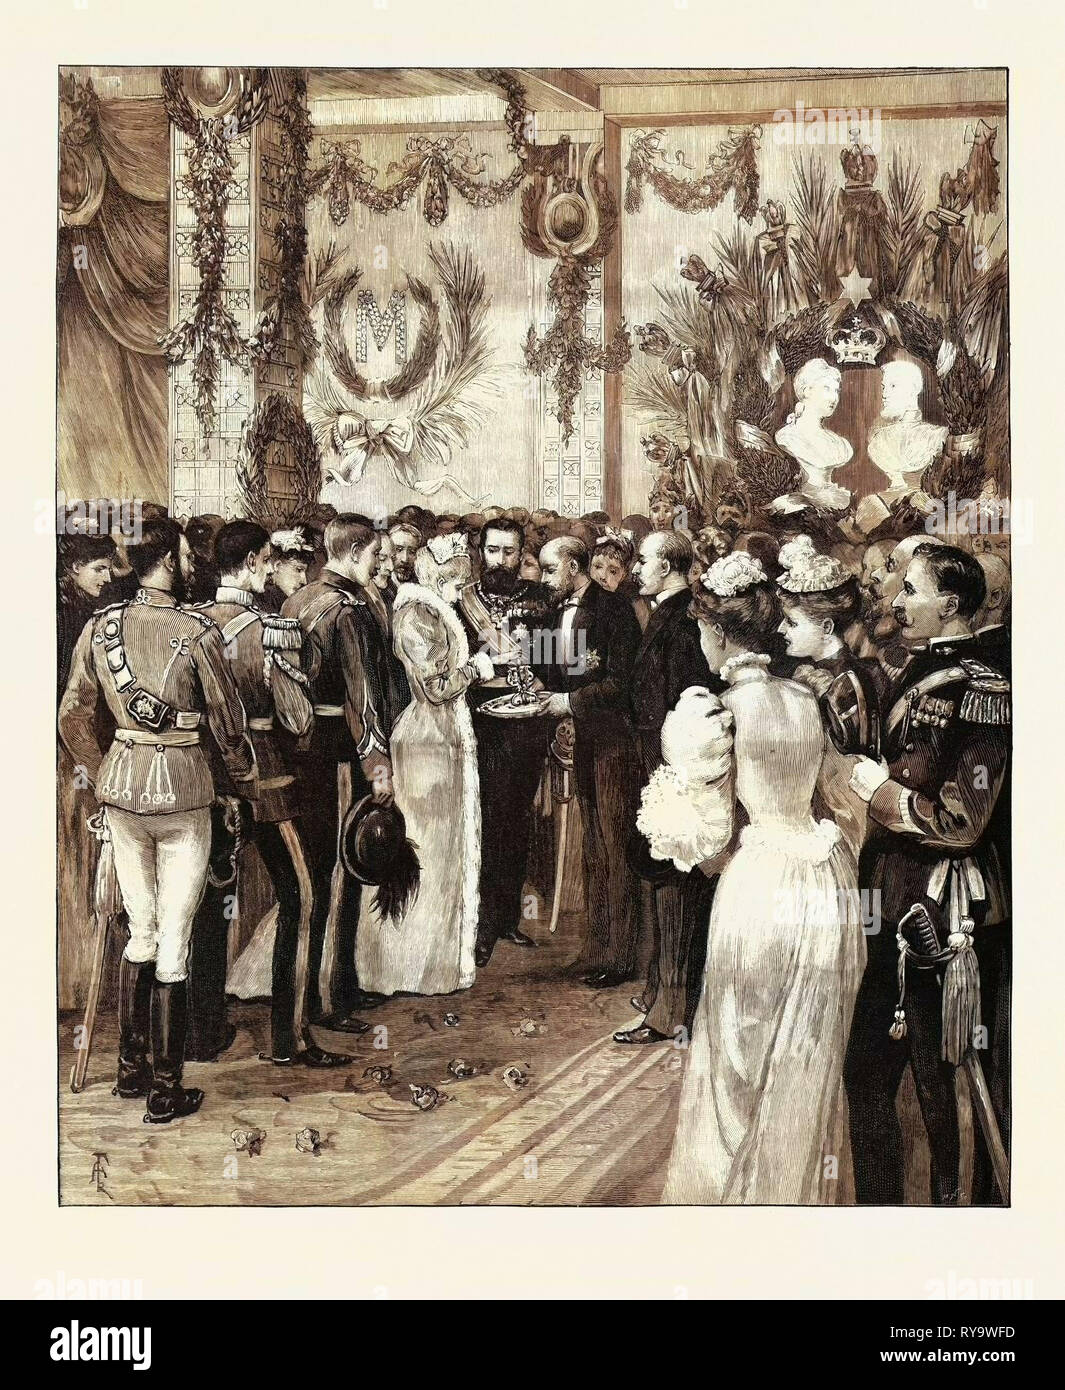 The Royal Home-Coming at Bucharest: The Mayor Offering Bread and Salt at the Railway Station, Romania, 1893 Engraving Stock Photo